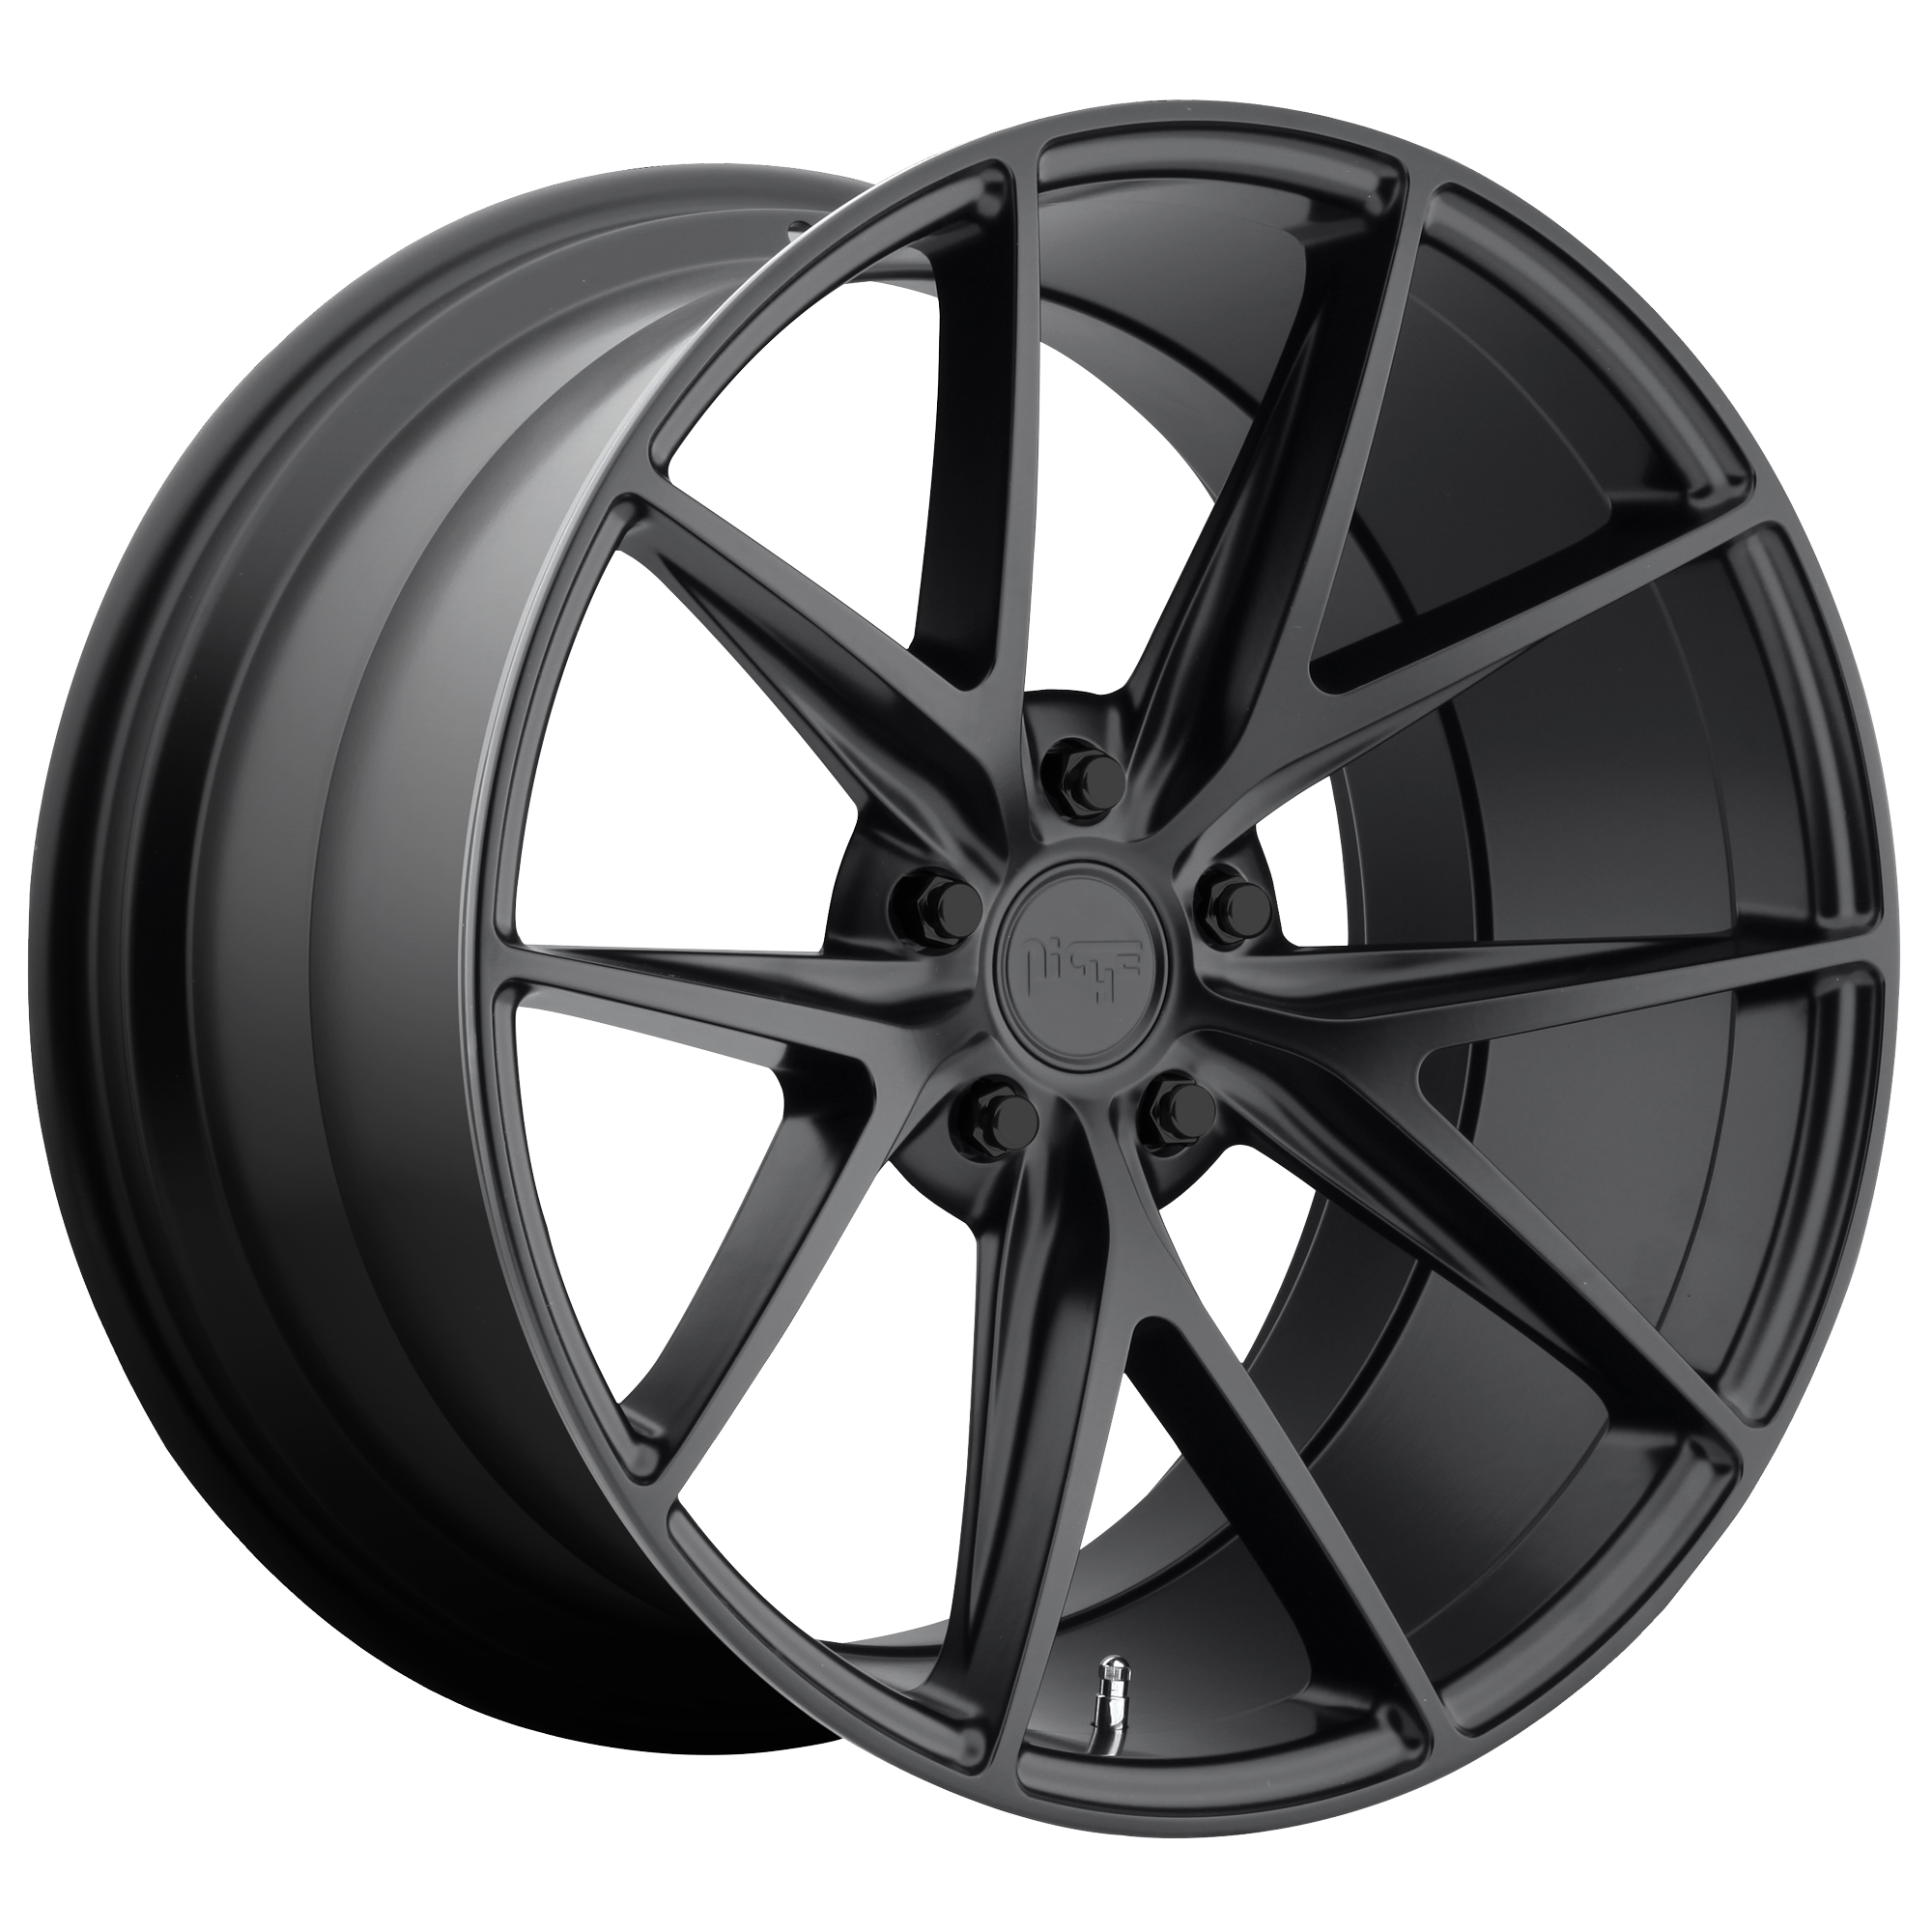 MISANO 19x8.5 5x100.00 MATTE BLACK (40 mm) - Tires and Engine Performance